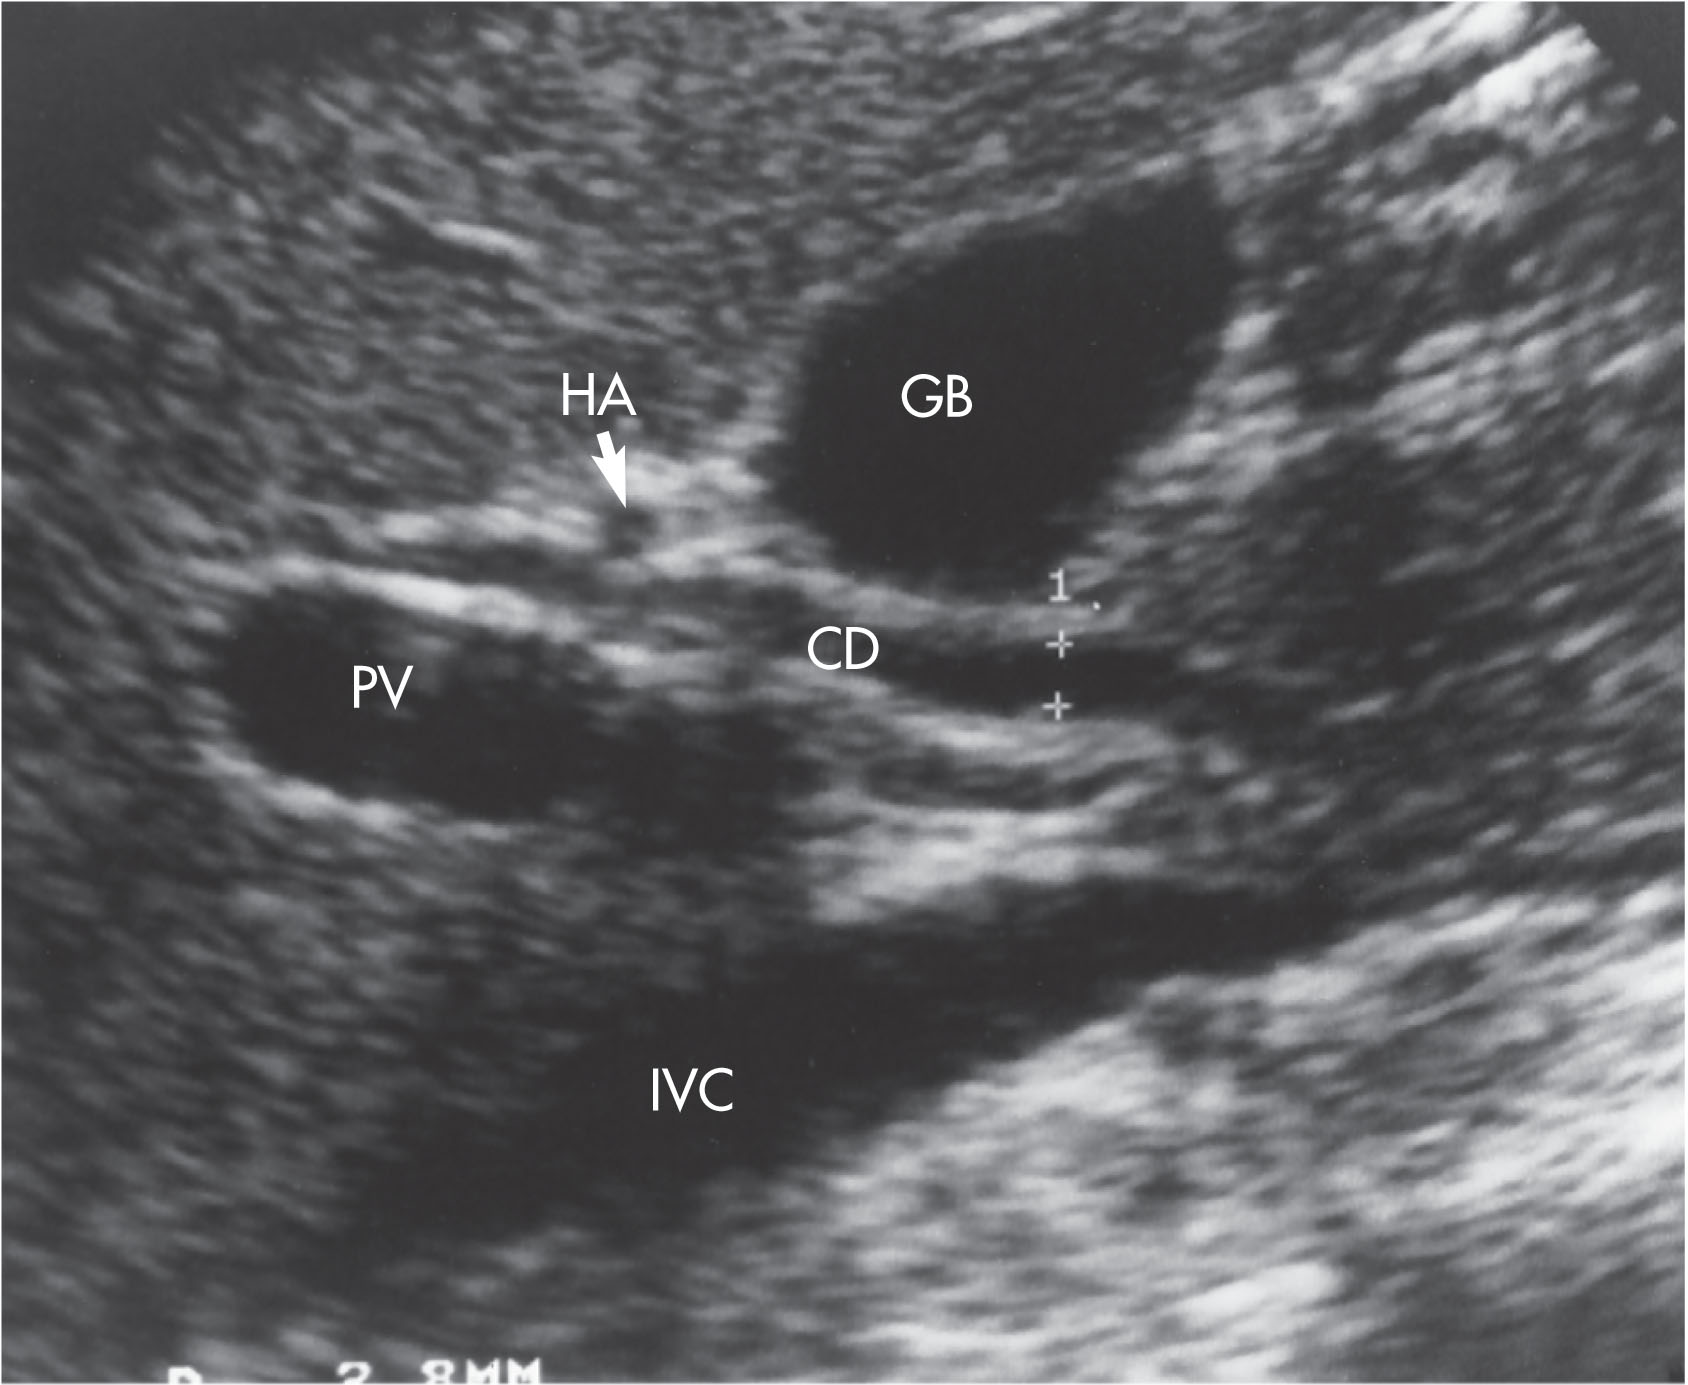 Fig. 10.15, On this sagittal image, the hepatic artery (HA) is shown anterior to the common duct (CD). The portal vein (PV) is anterior to the inferior vena cava (IVC). GB , Gallbladder.